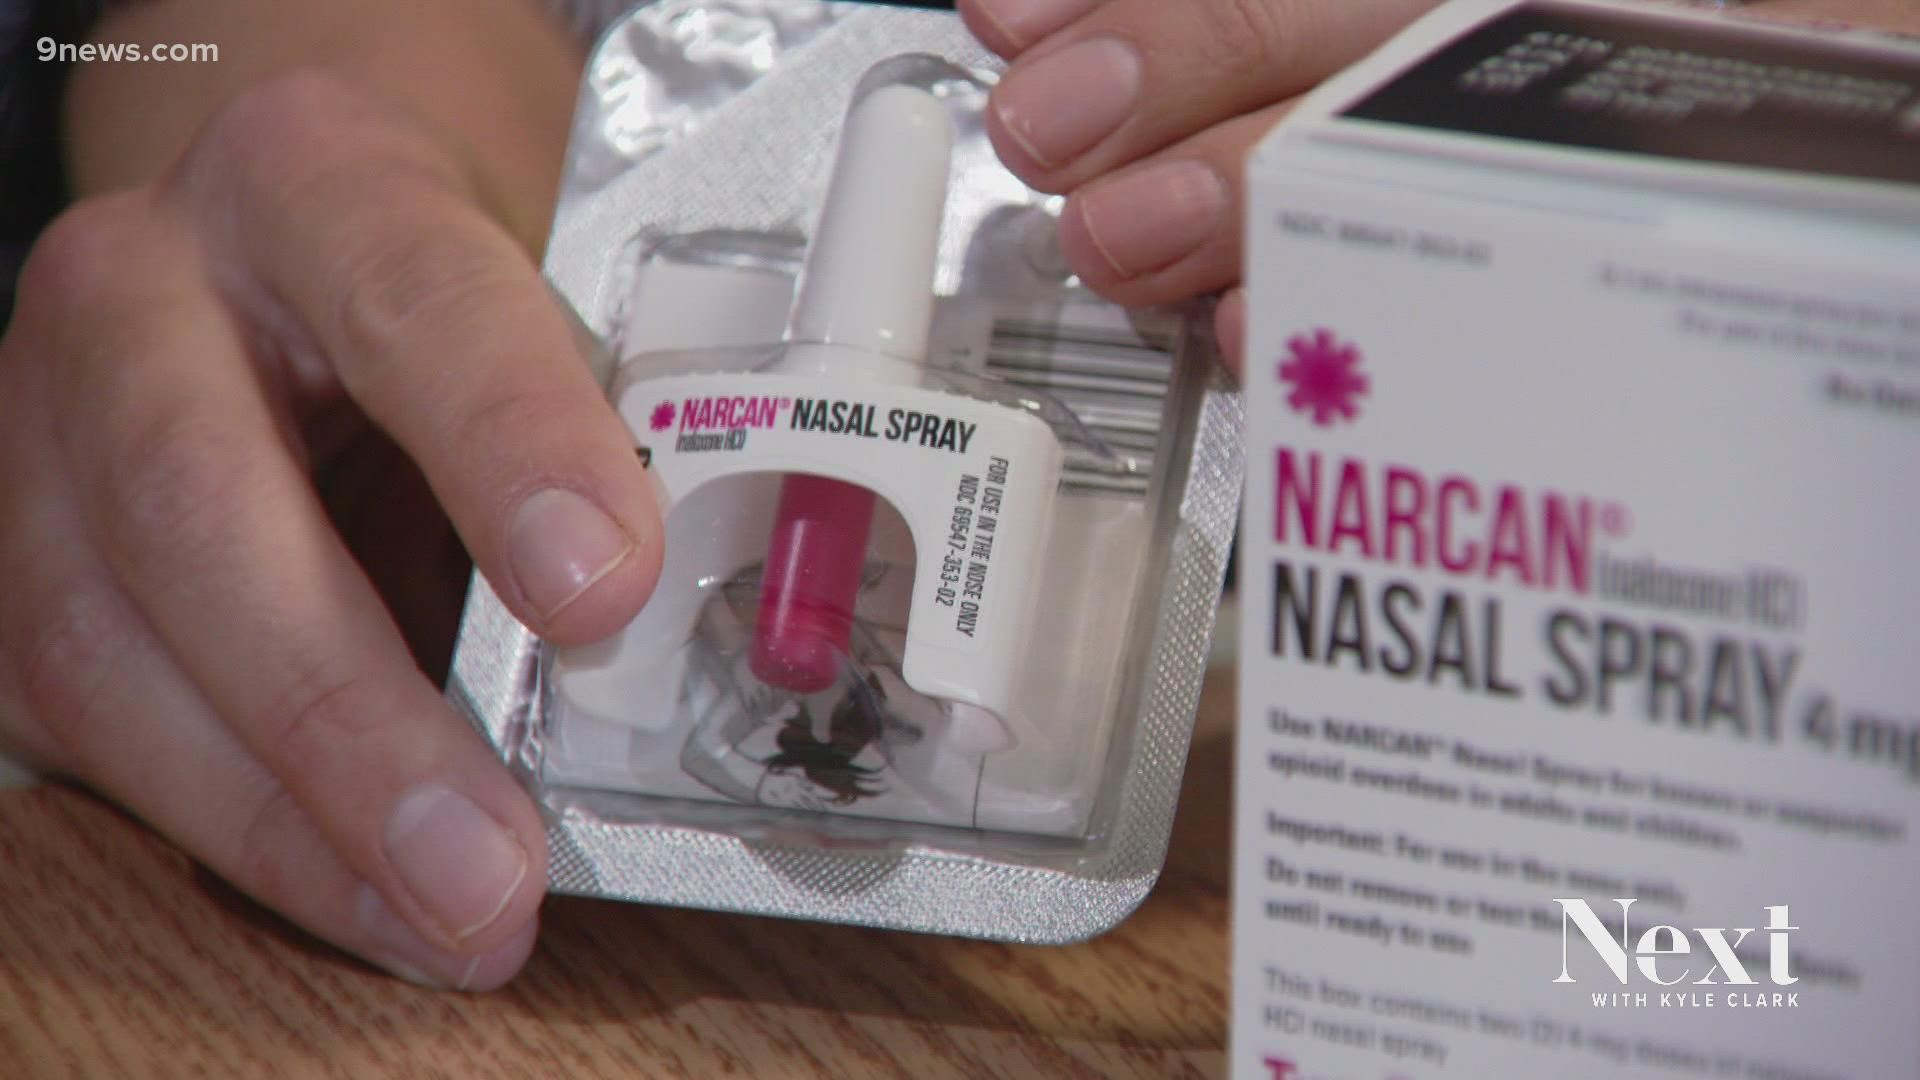 As part of the Colorado Naloxone Project, Swedish Hospital's labor and delivery department is trying to help parents struggling with addiction and protect babies.